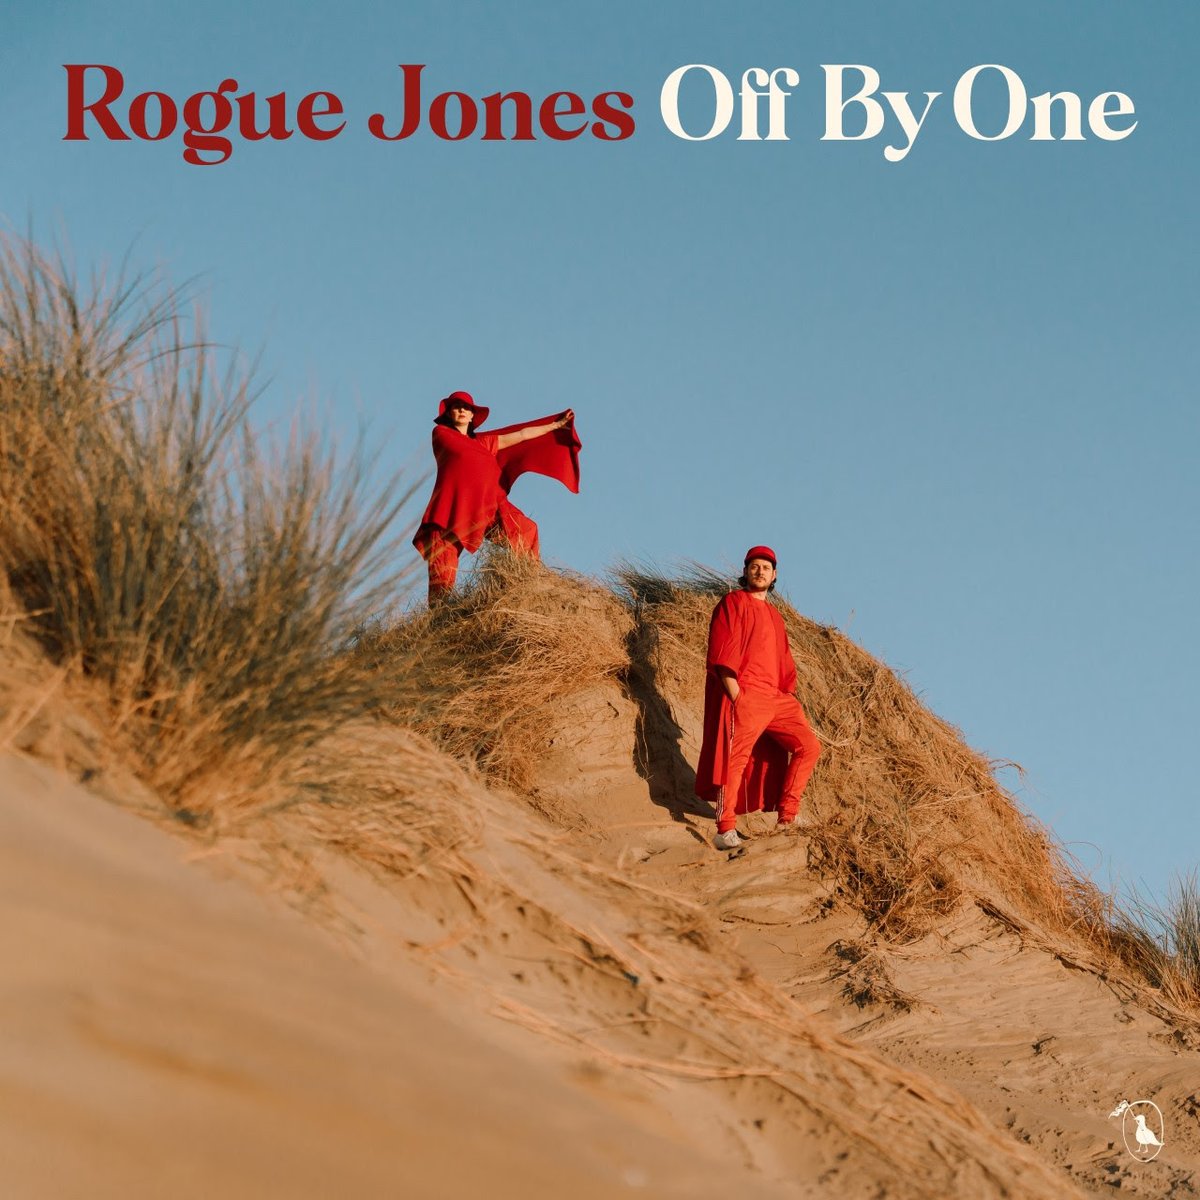 Tune into @Radio_WIGWAM at 8pm for the best of #Welsh #music only on the #WelshConnectionsPlaylist show including our #trackoftheweek from @roguejonesband 

@welsh_connex @WelshConnect @TIWNmedia #playlist #wales #radiowigwam #welshmusic